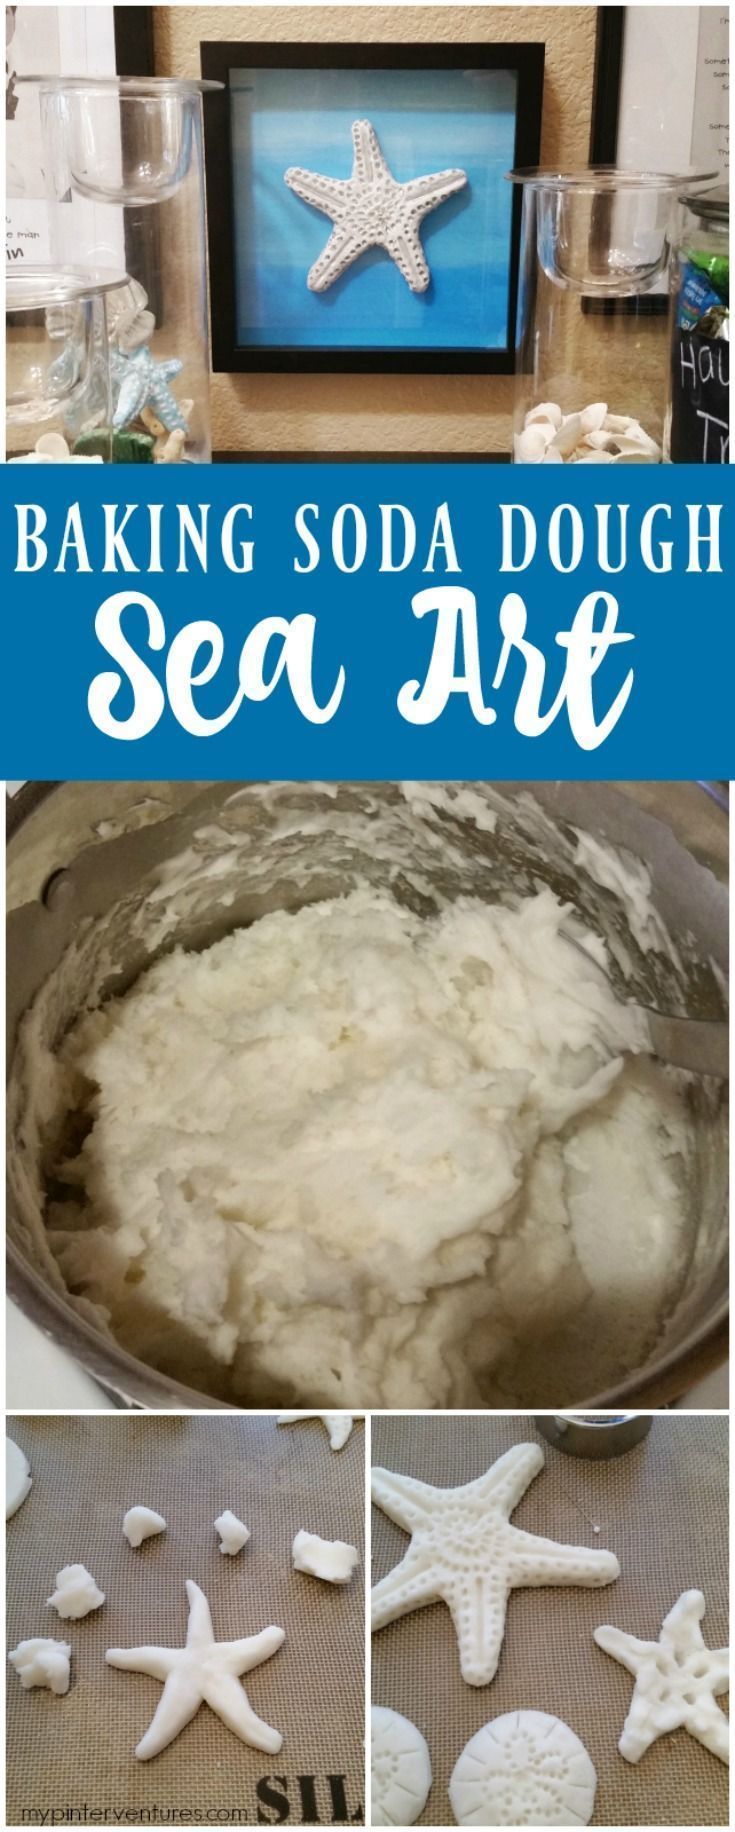 14 diy projects To Try baking soda ideas